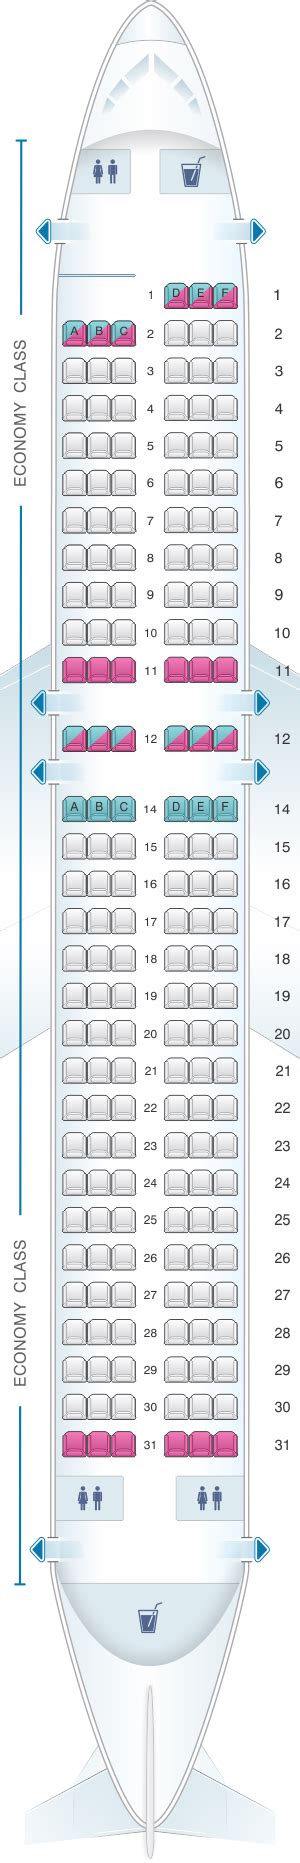 Allegiant air plane seating chart. Primarily serving the American South and Southwest regions, Allegiant Air is a budget carrier that offers low-cost flights to several prominent hubs within the United States. Allegiant is solely a domestic airline, with a fleet of 81 planes serving 109 destinations throughout the country. Allegiant's primary mission is to connect travelers in ... 